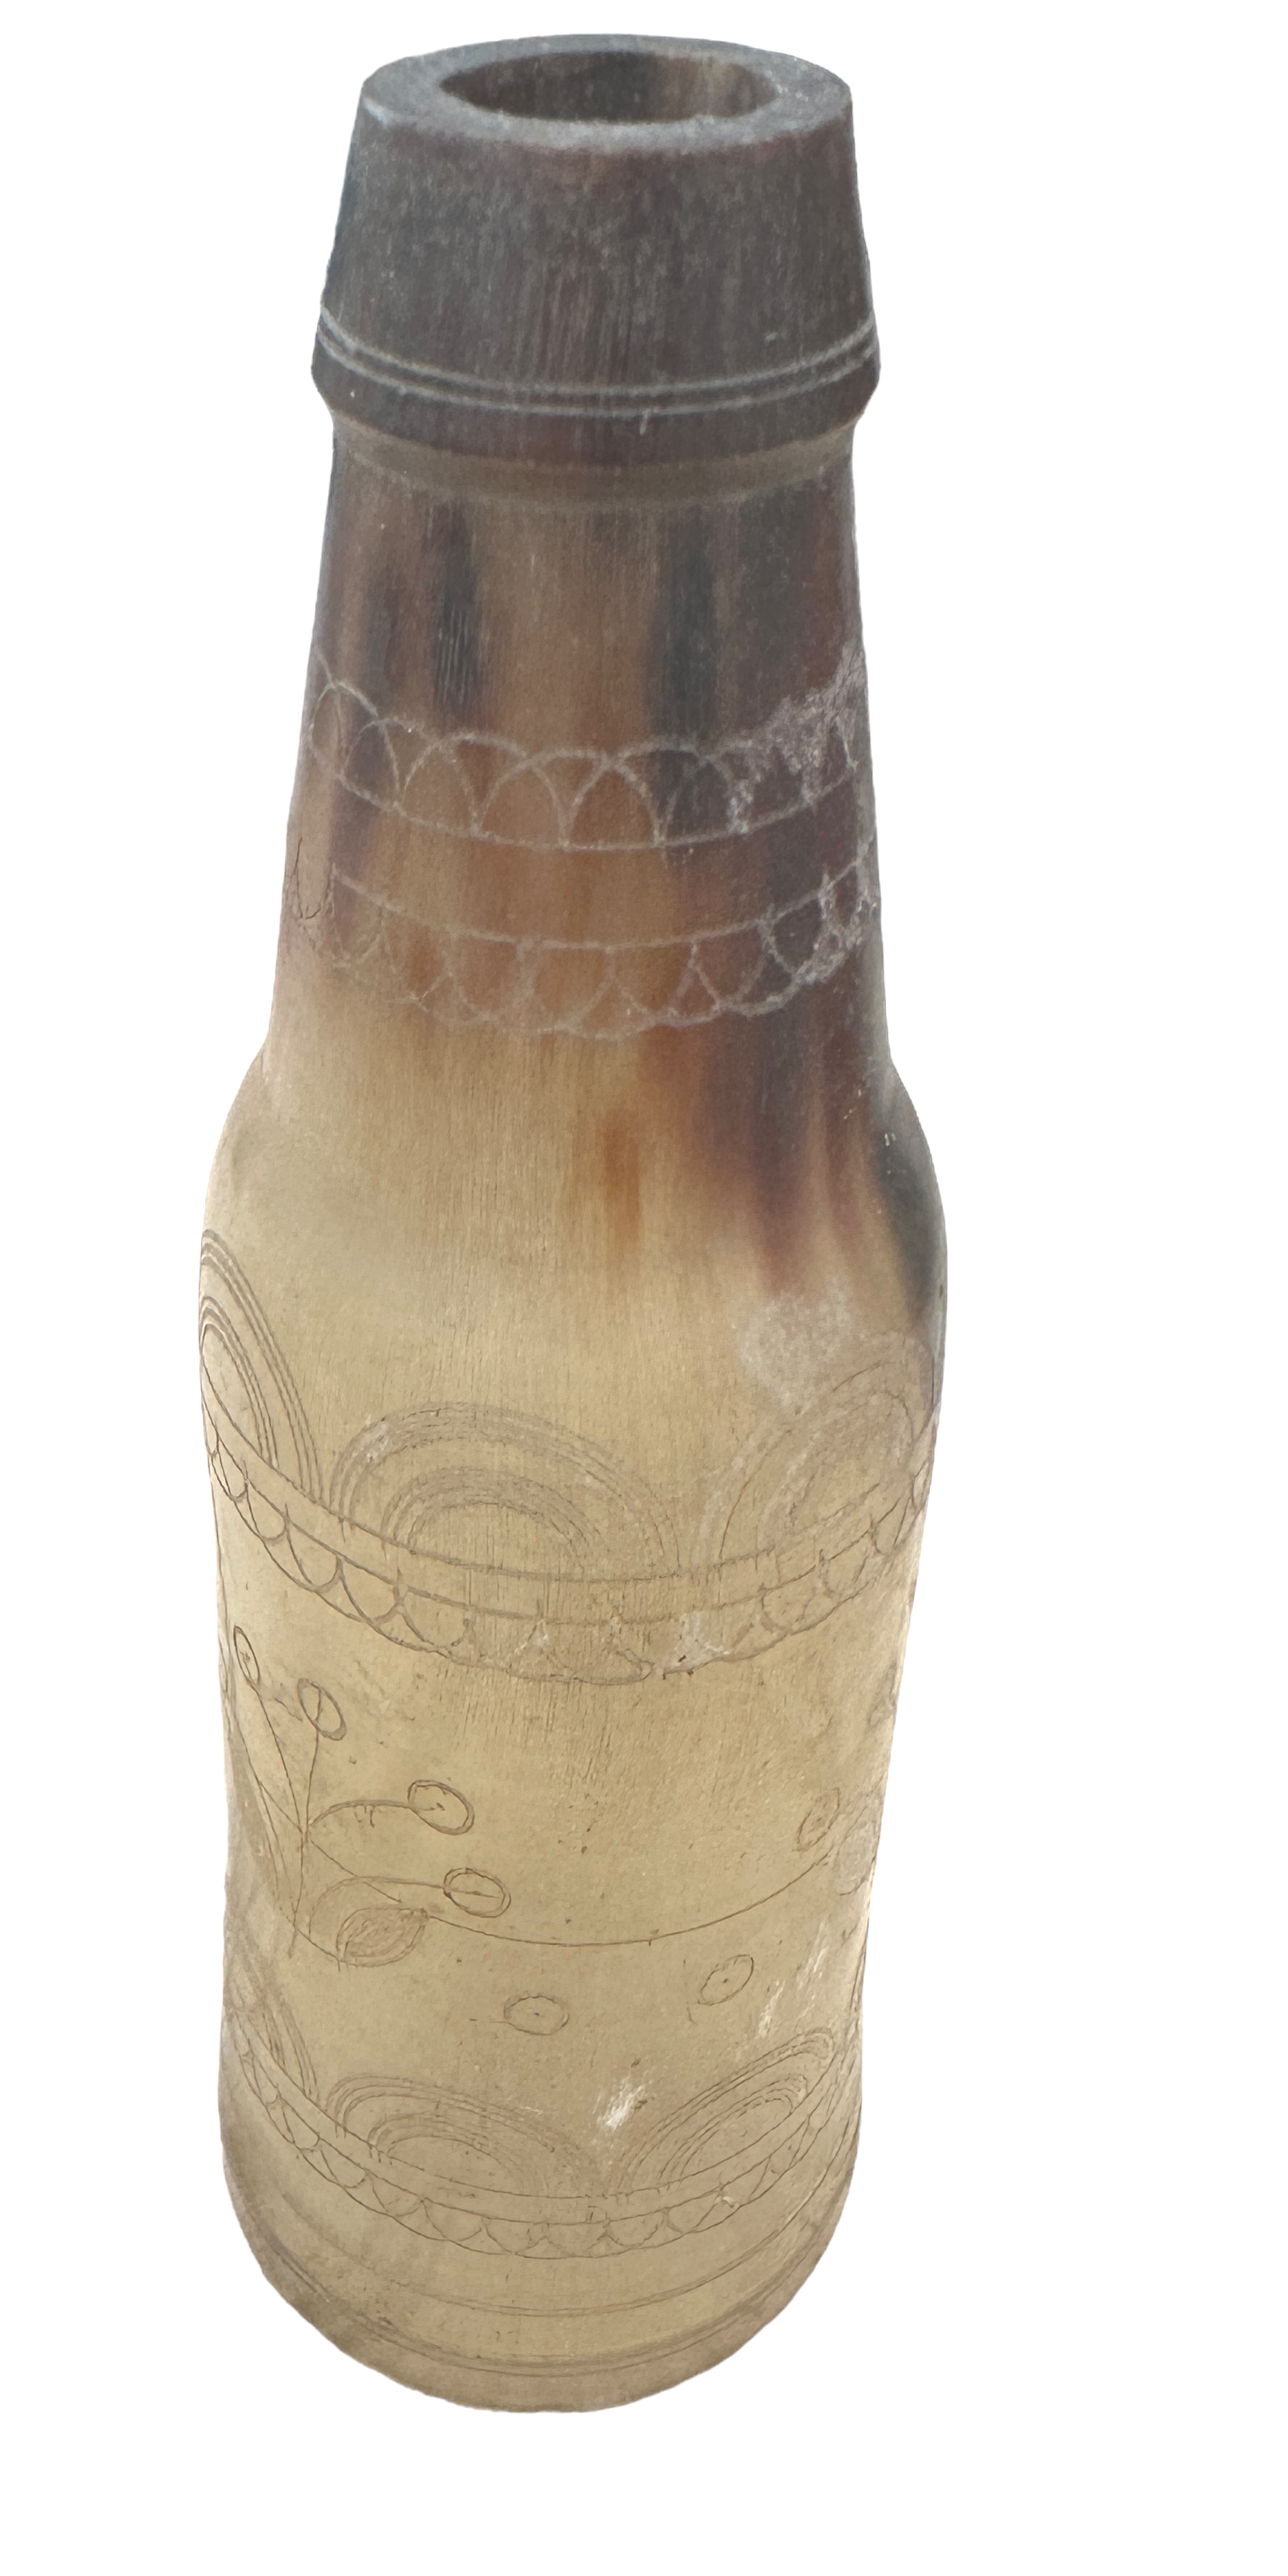 Antique Decorated Horn Bottle - 6 3/8" tall and 2 3/16" diameter at the base. - Image 4 of 4